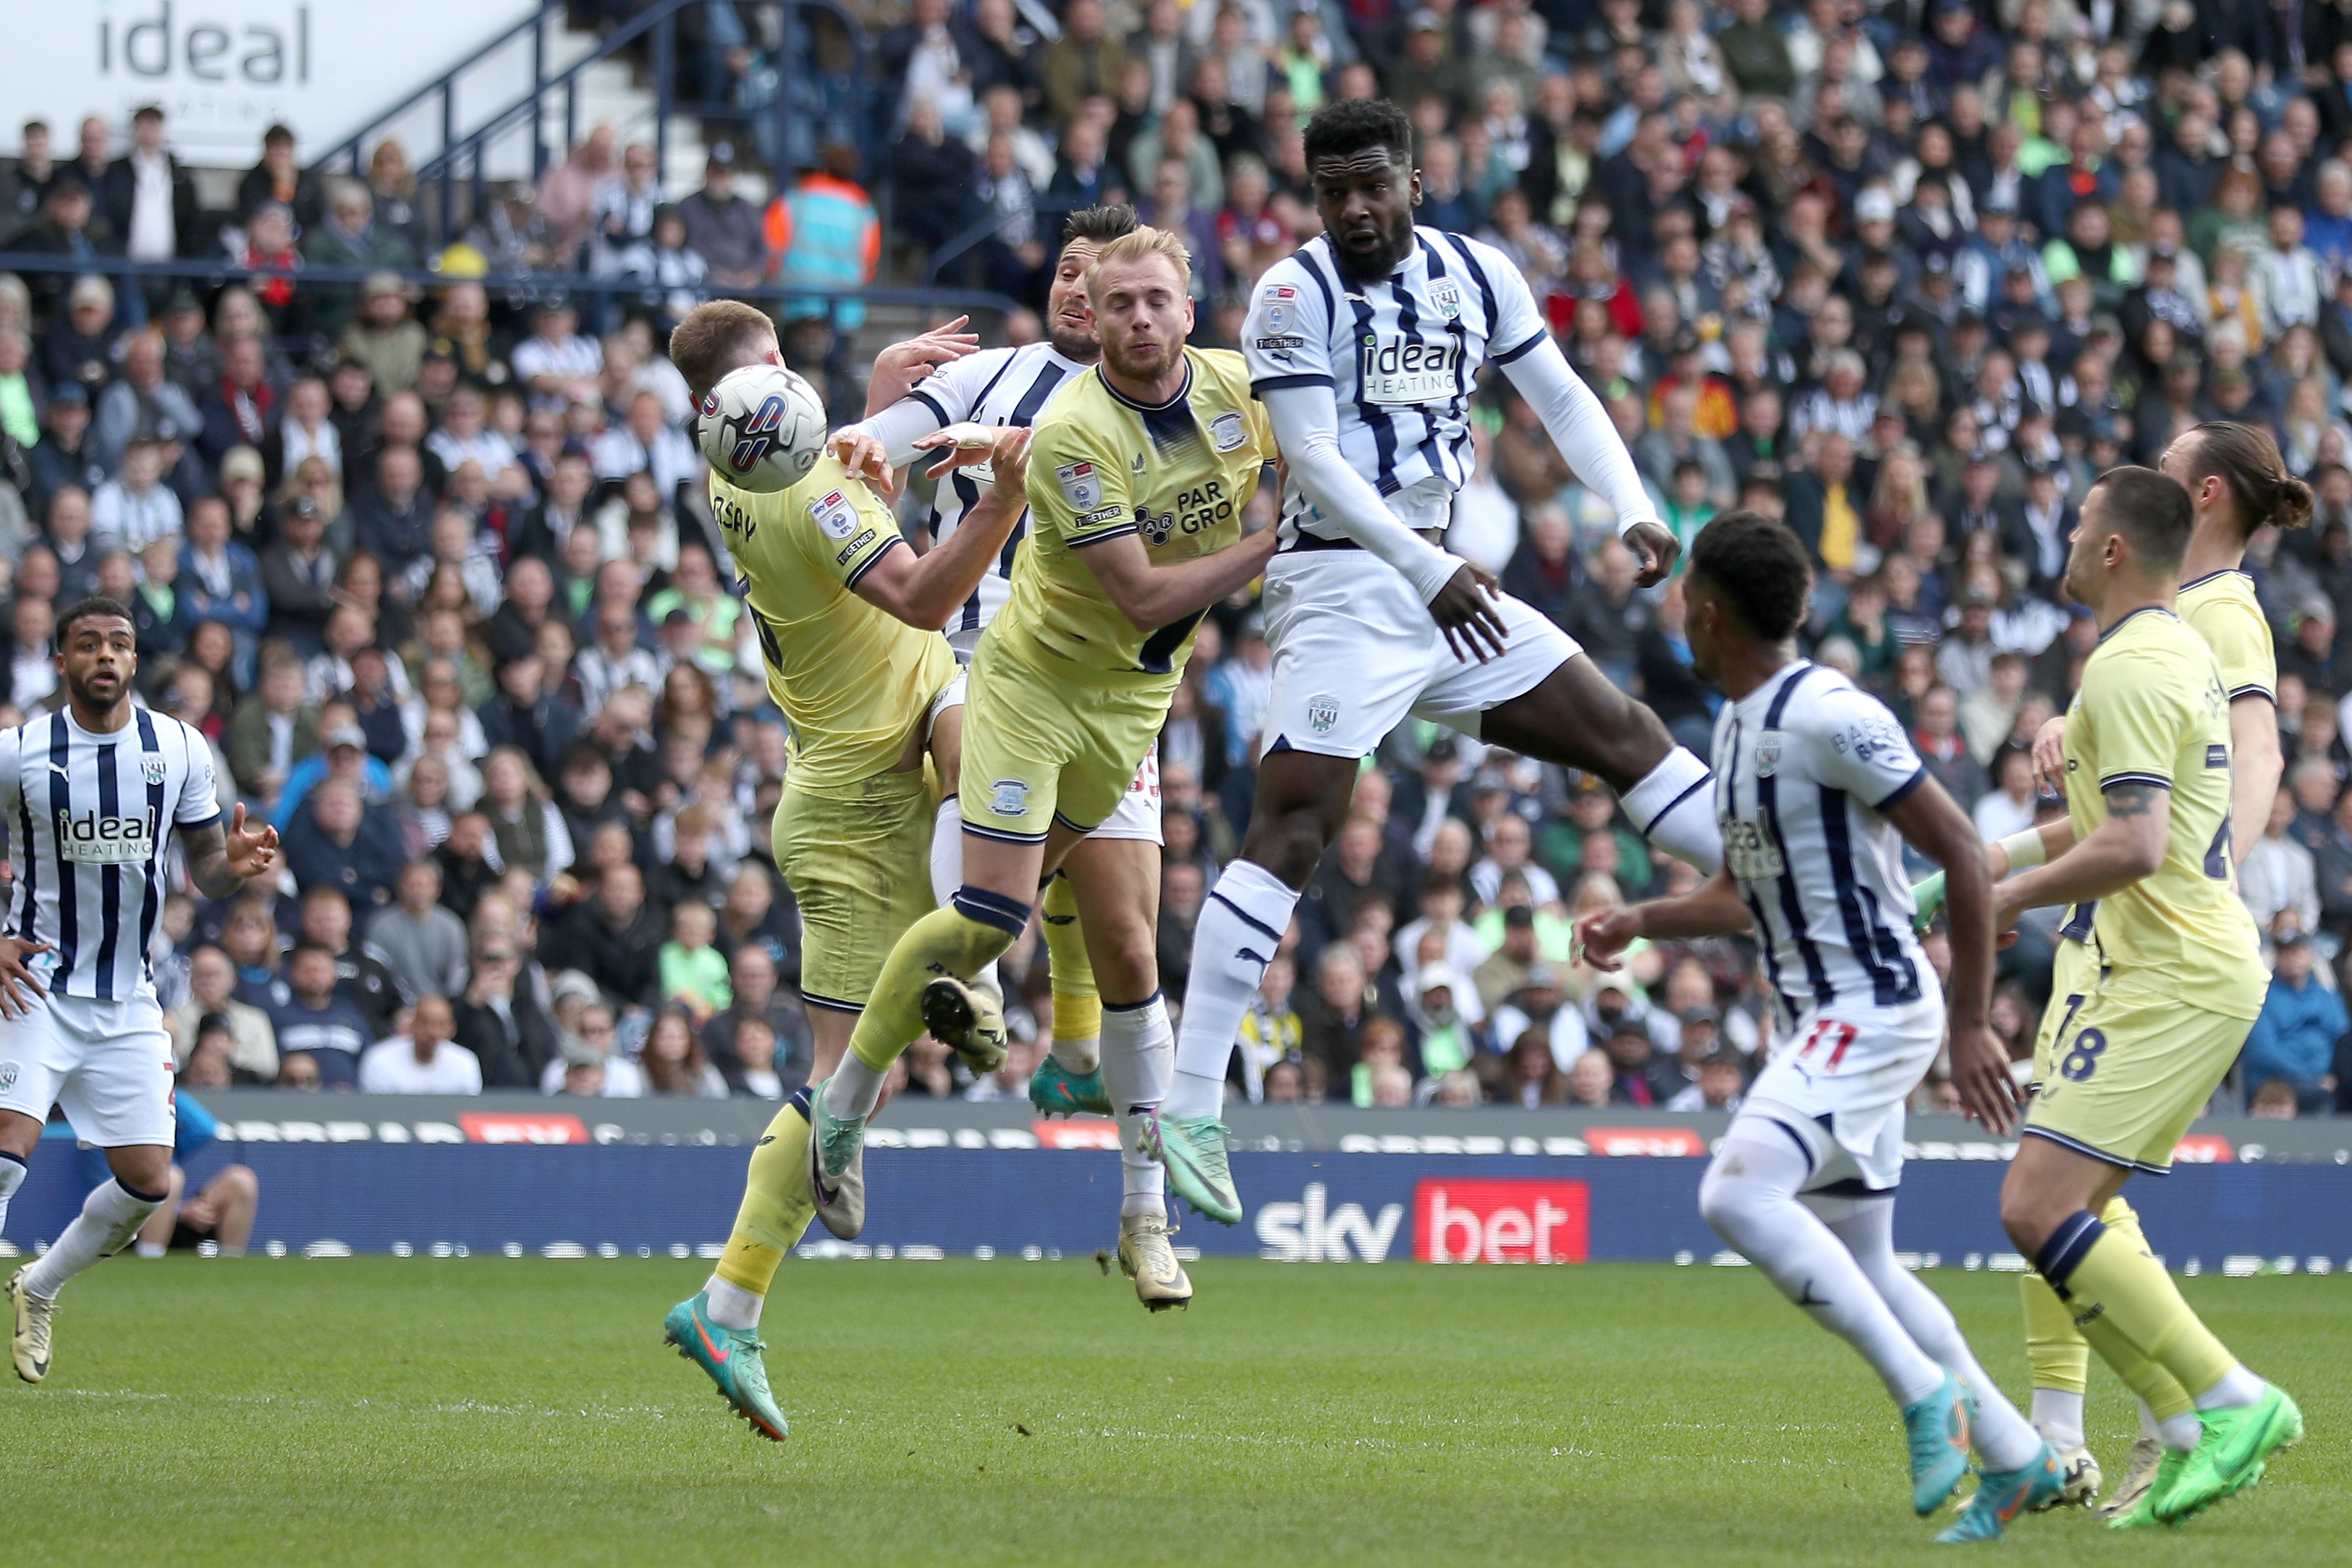 Cedric Kipre jumps to try and win a header against Preston 